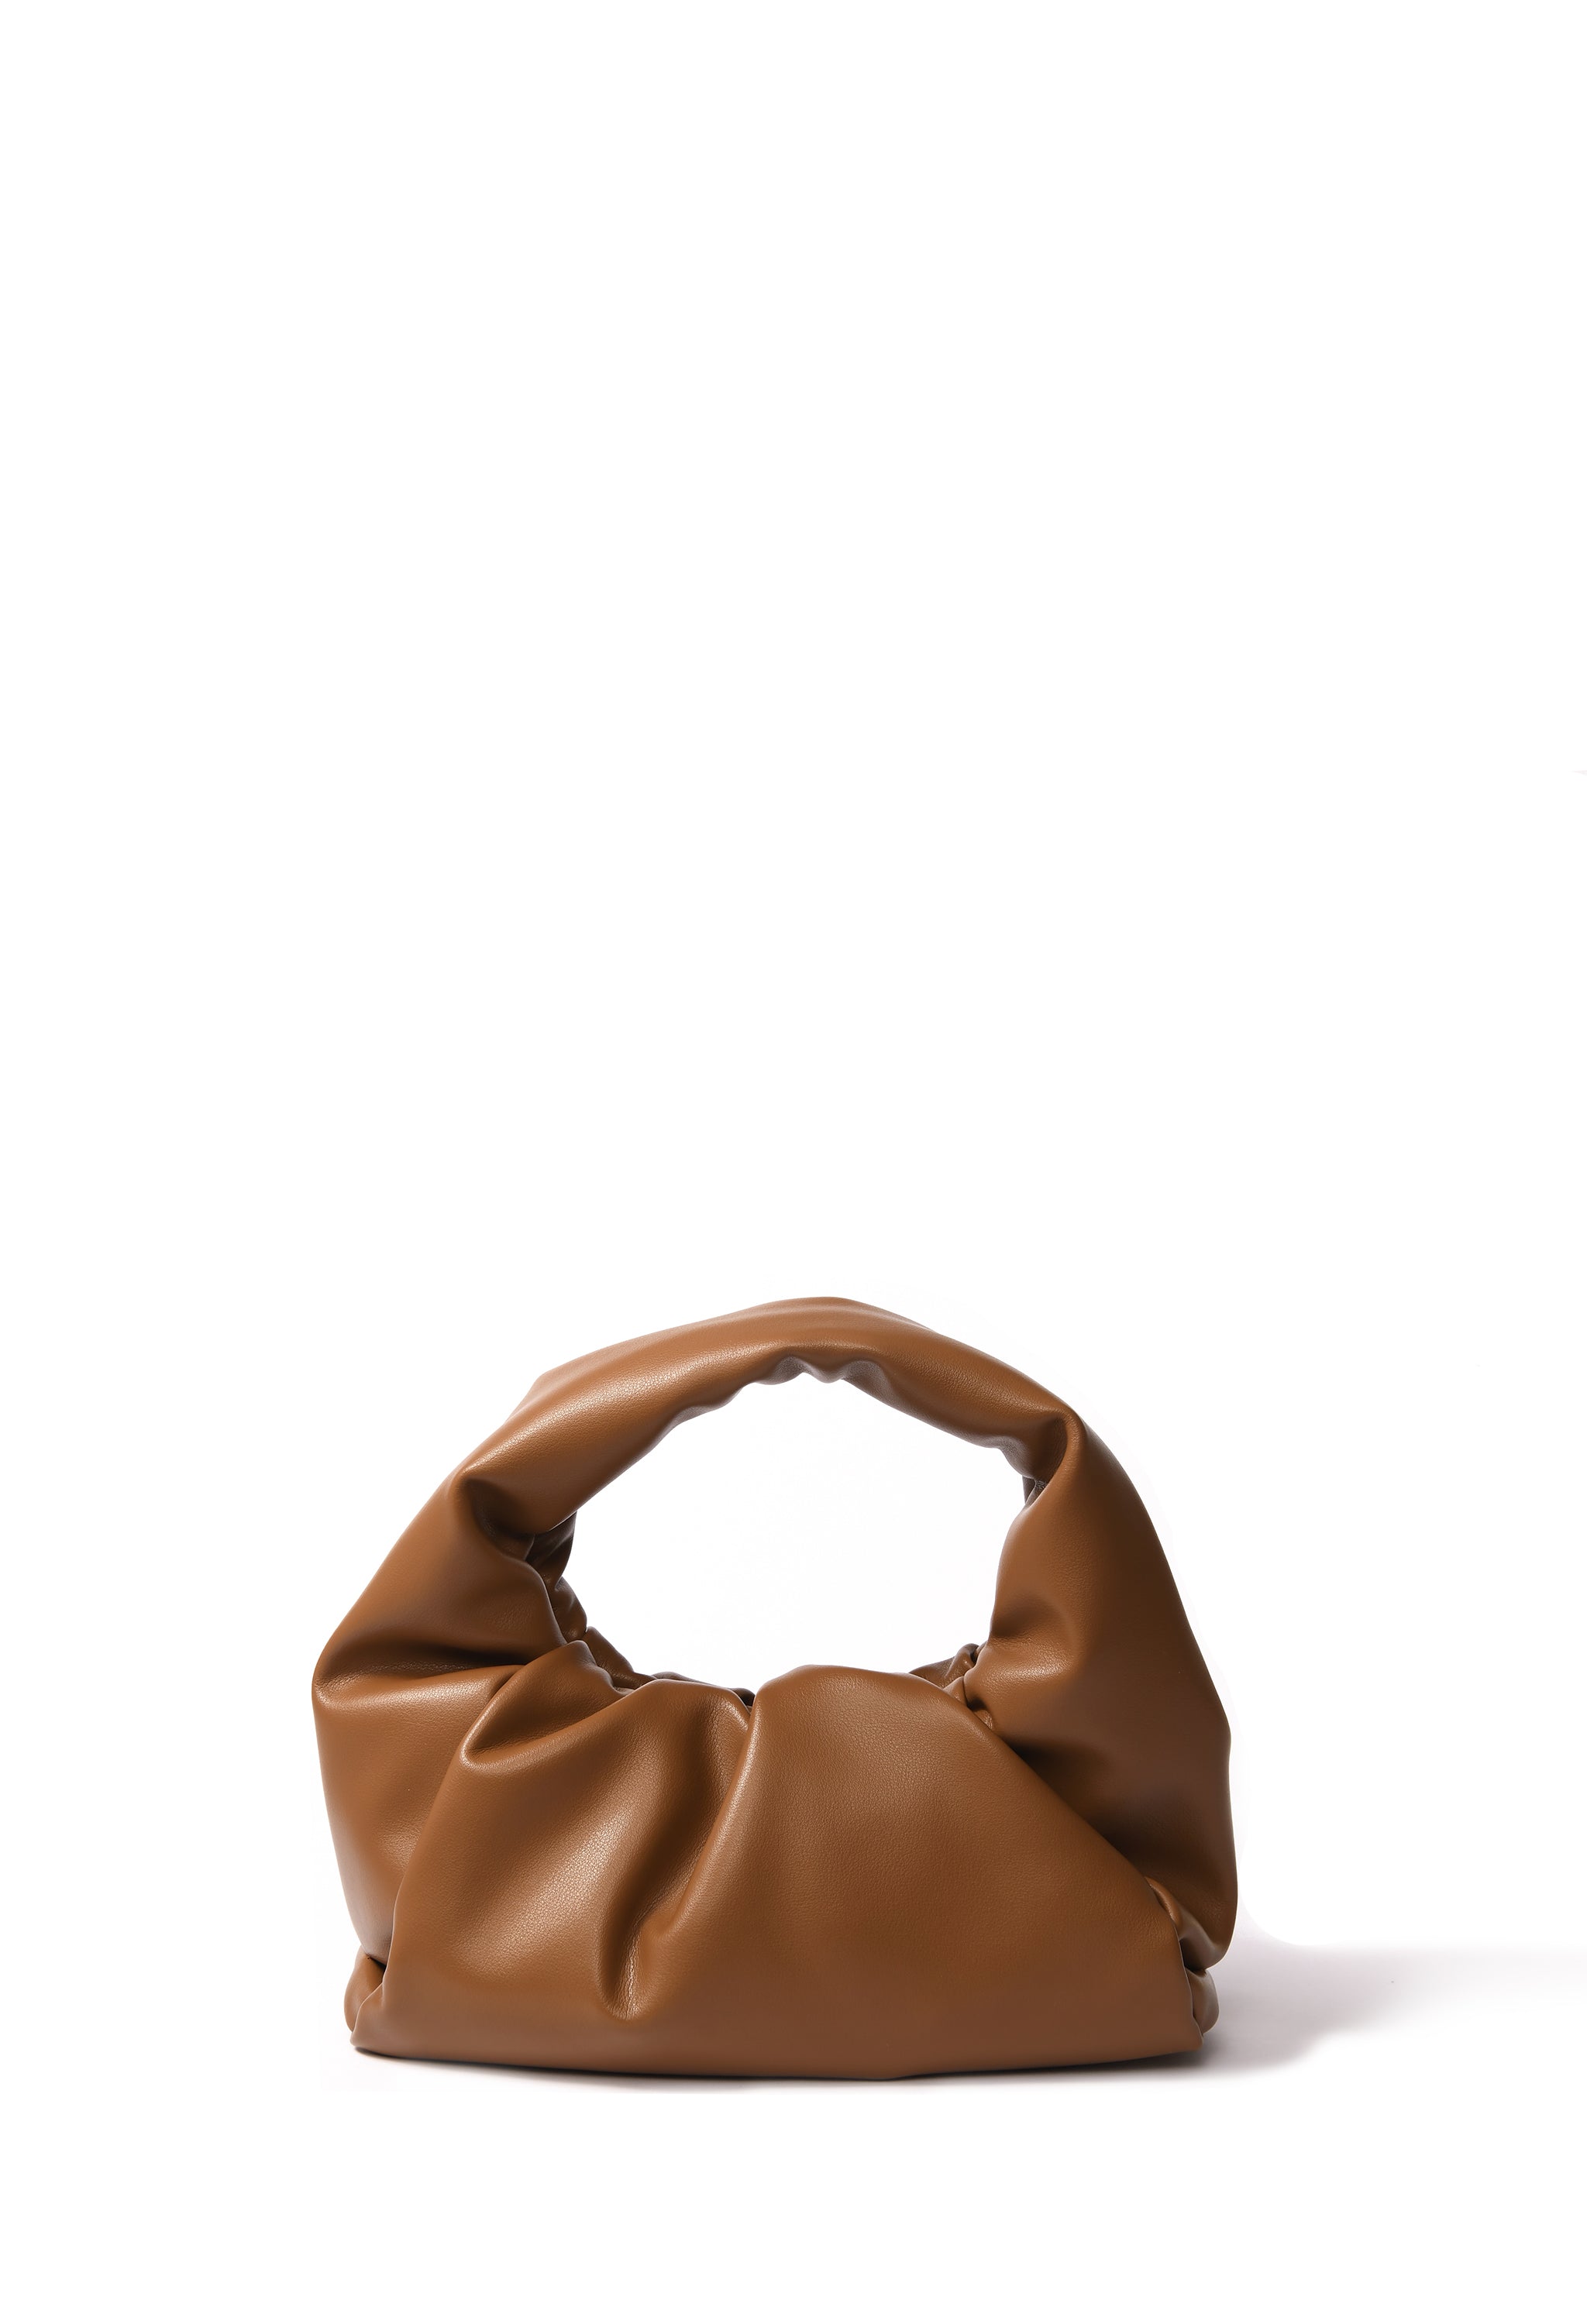 Marshmallow croissant bag in soft leather, Caramel BOB ORE blue collection on sale 2022